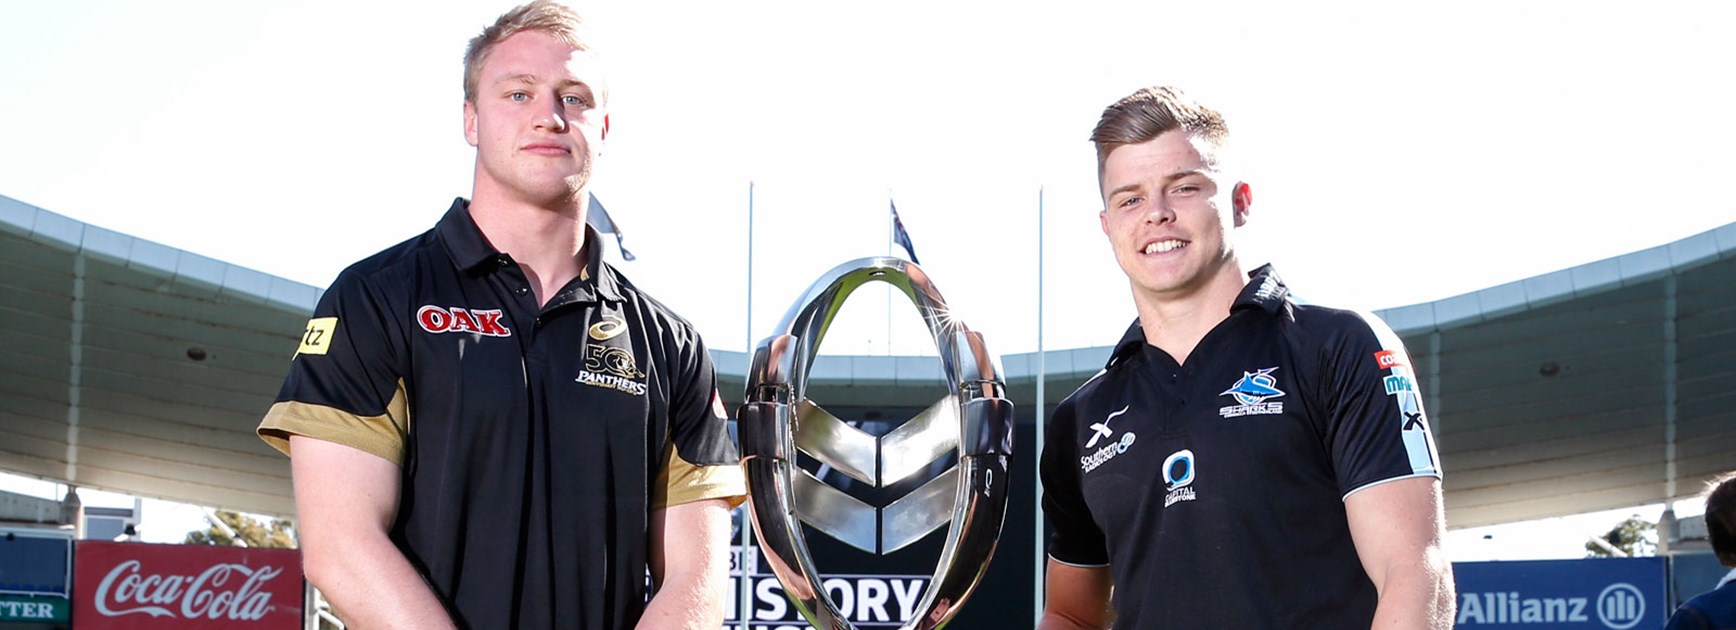 The Panthers and Sharks will meet in the first week of the 2016 Holden Cup Finals Series.